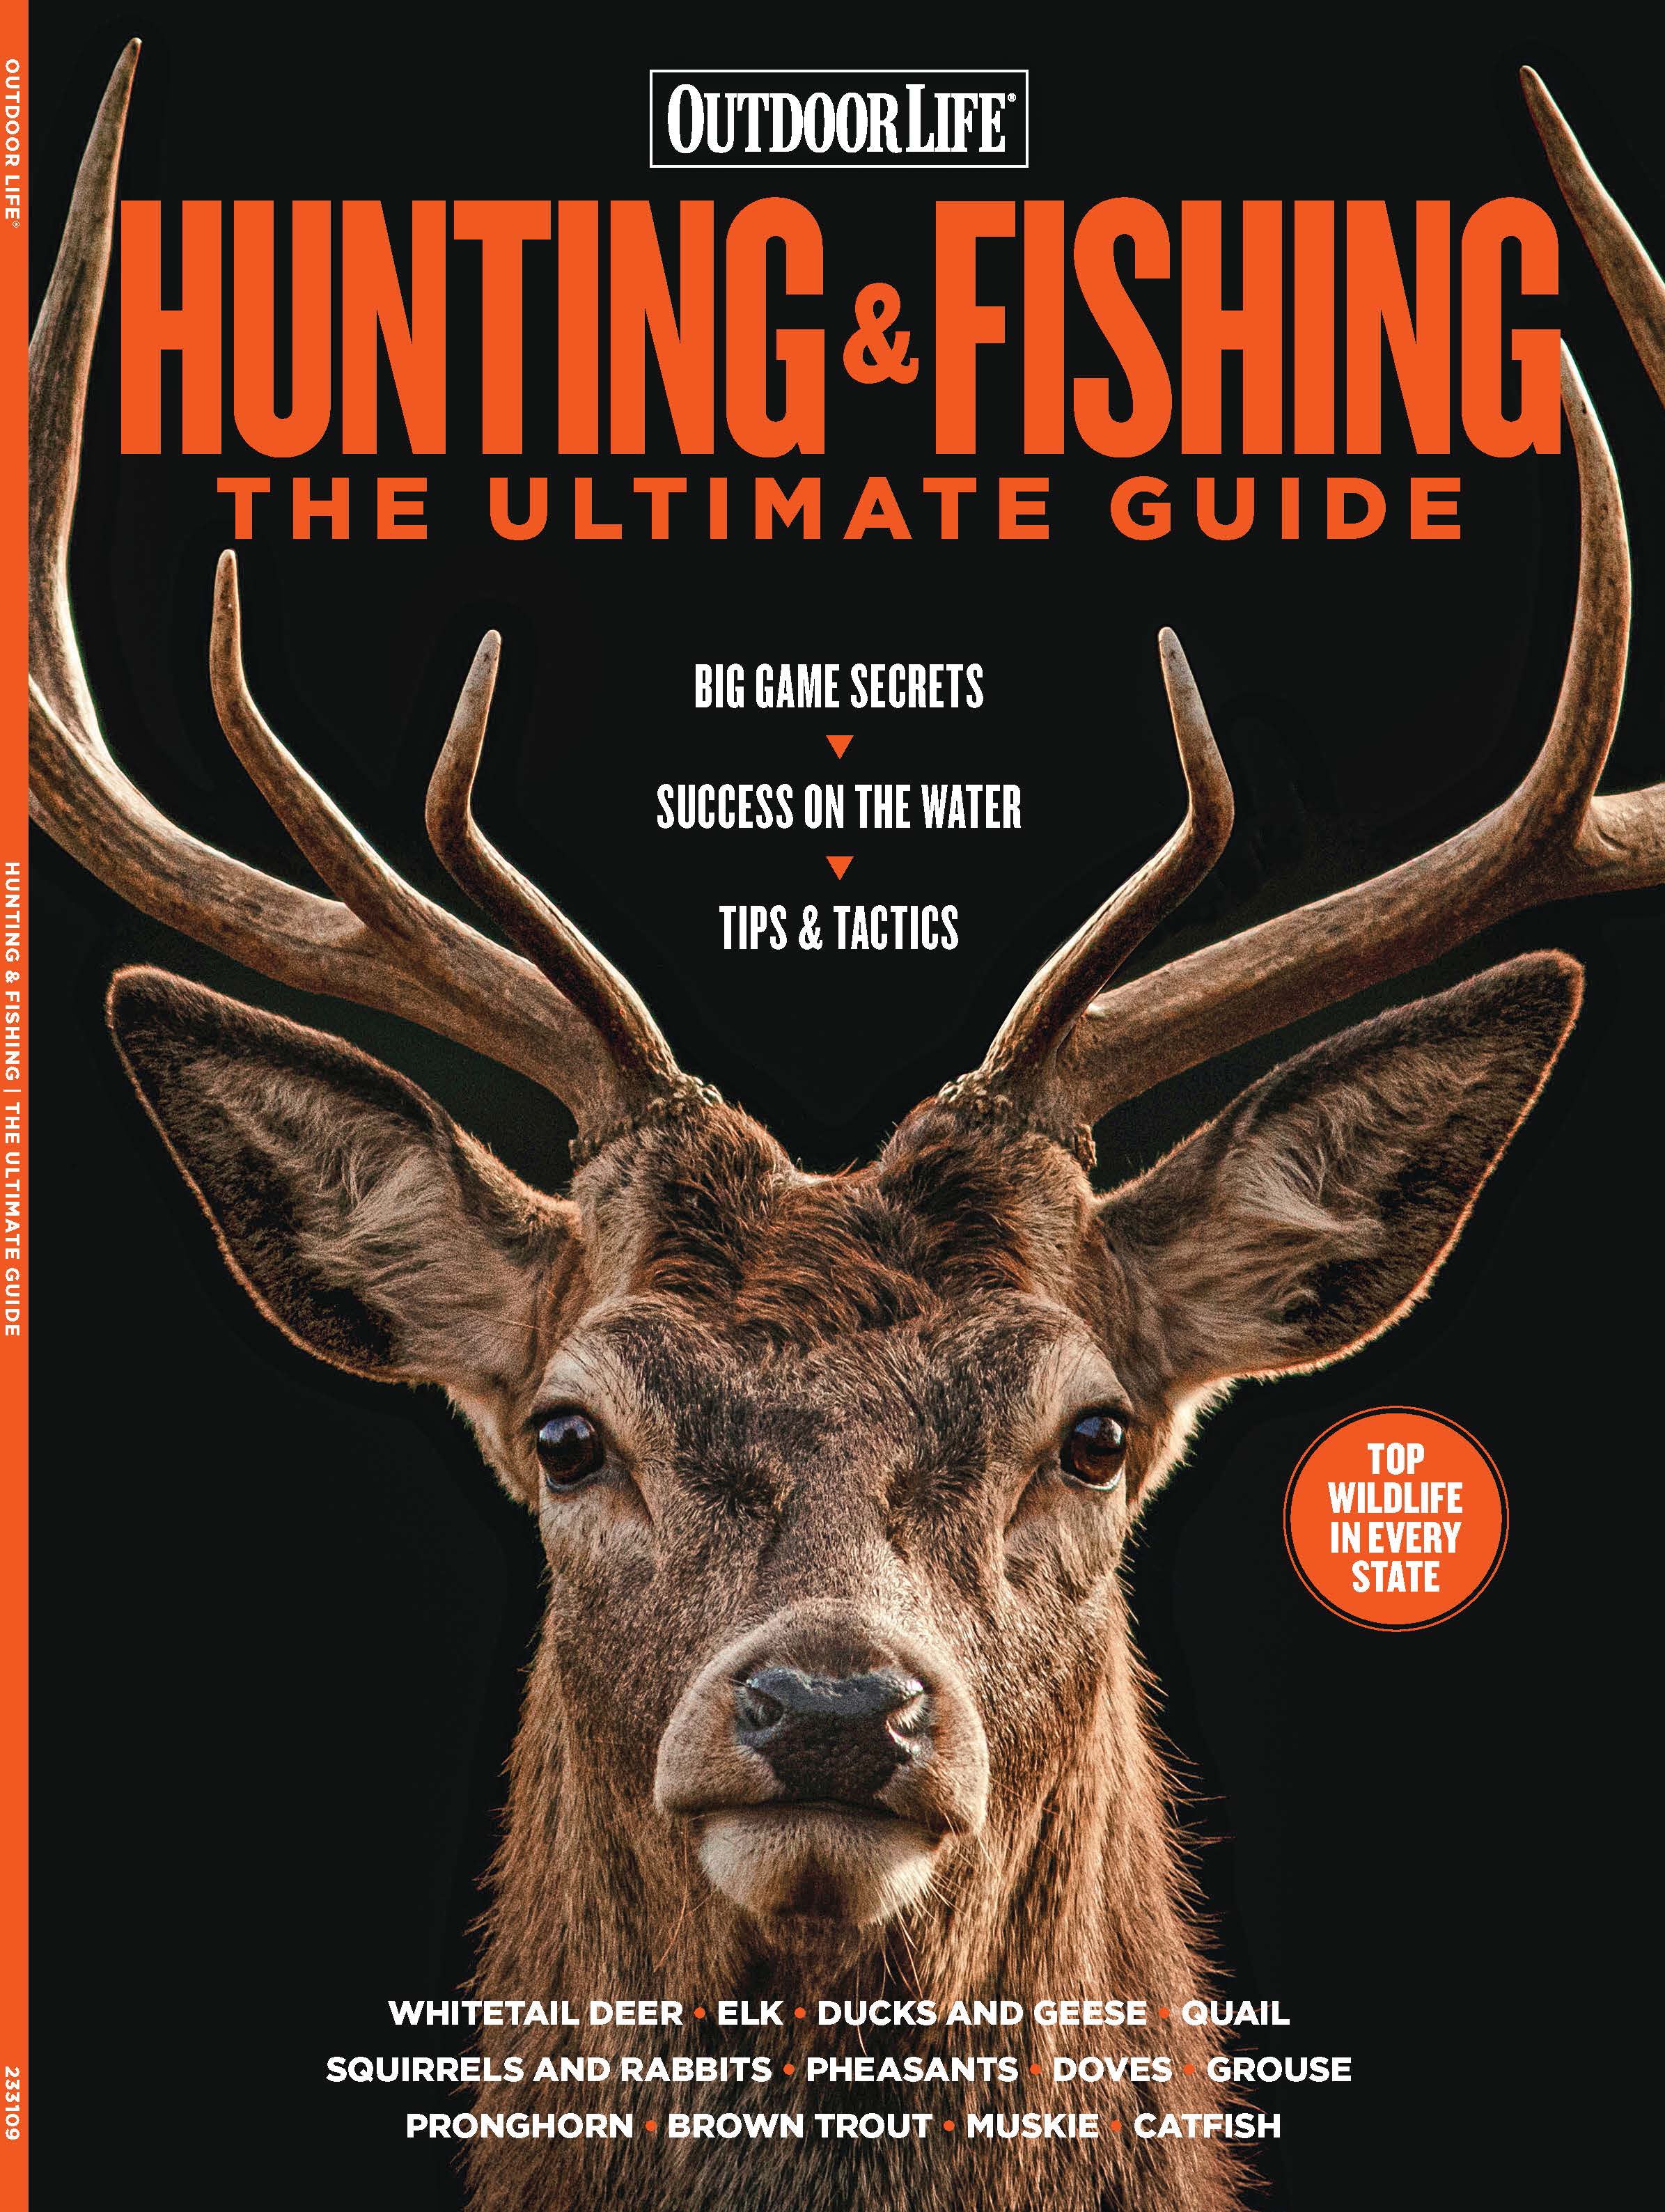 Outdoor Life - Hunting & Fishing Ultimate Guide: Tips & Tactics